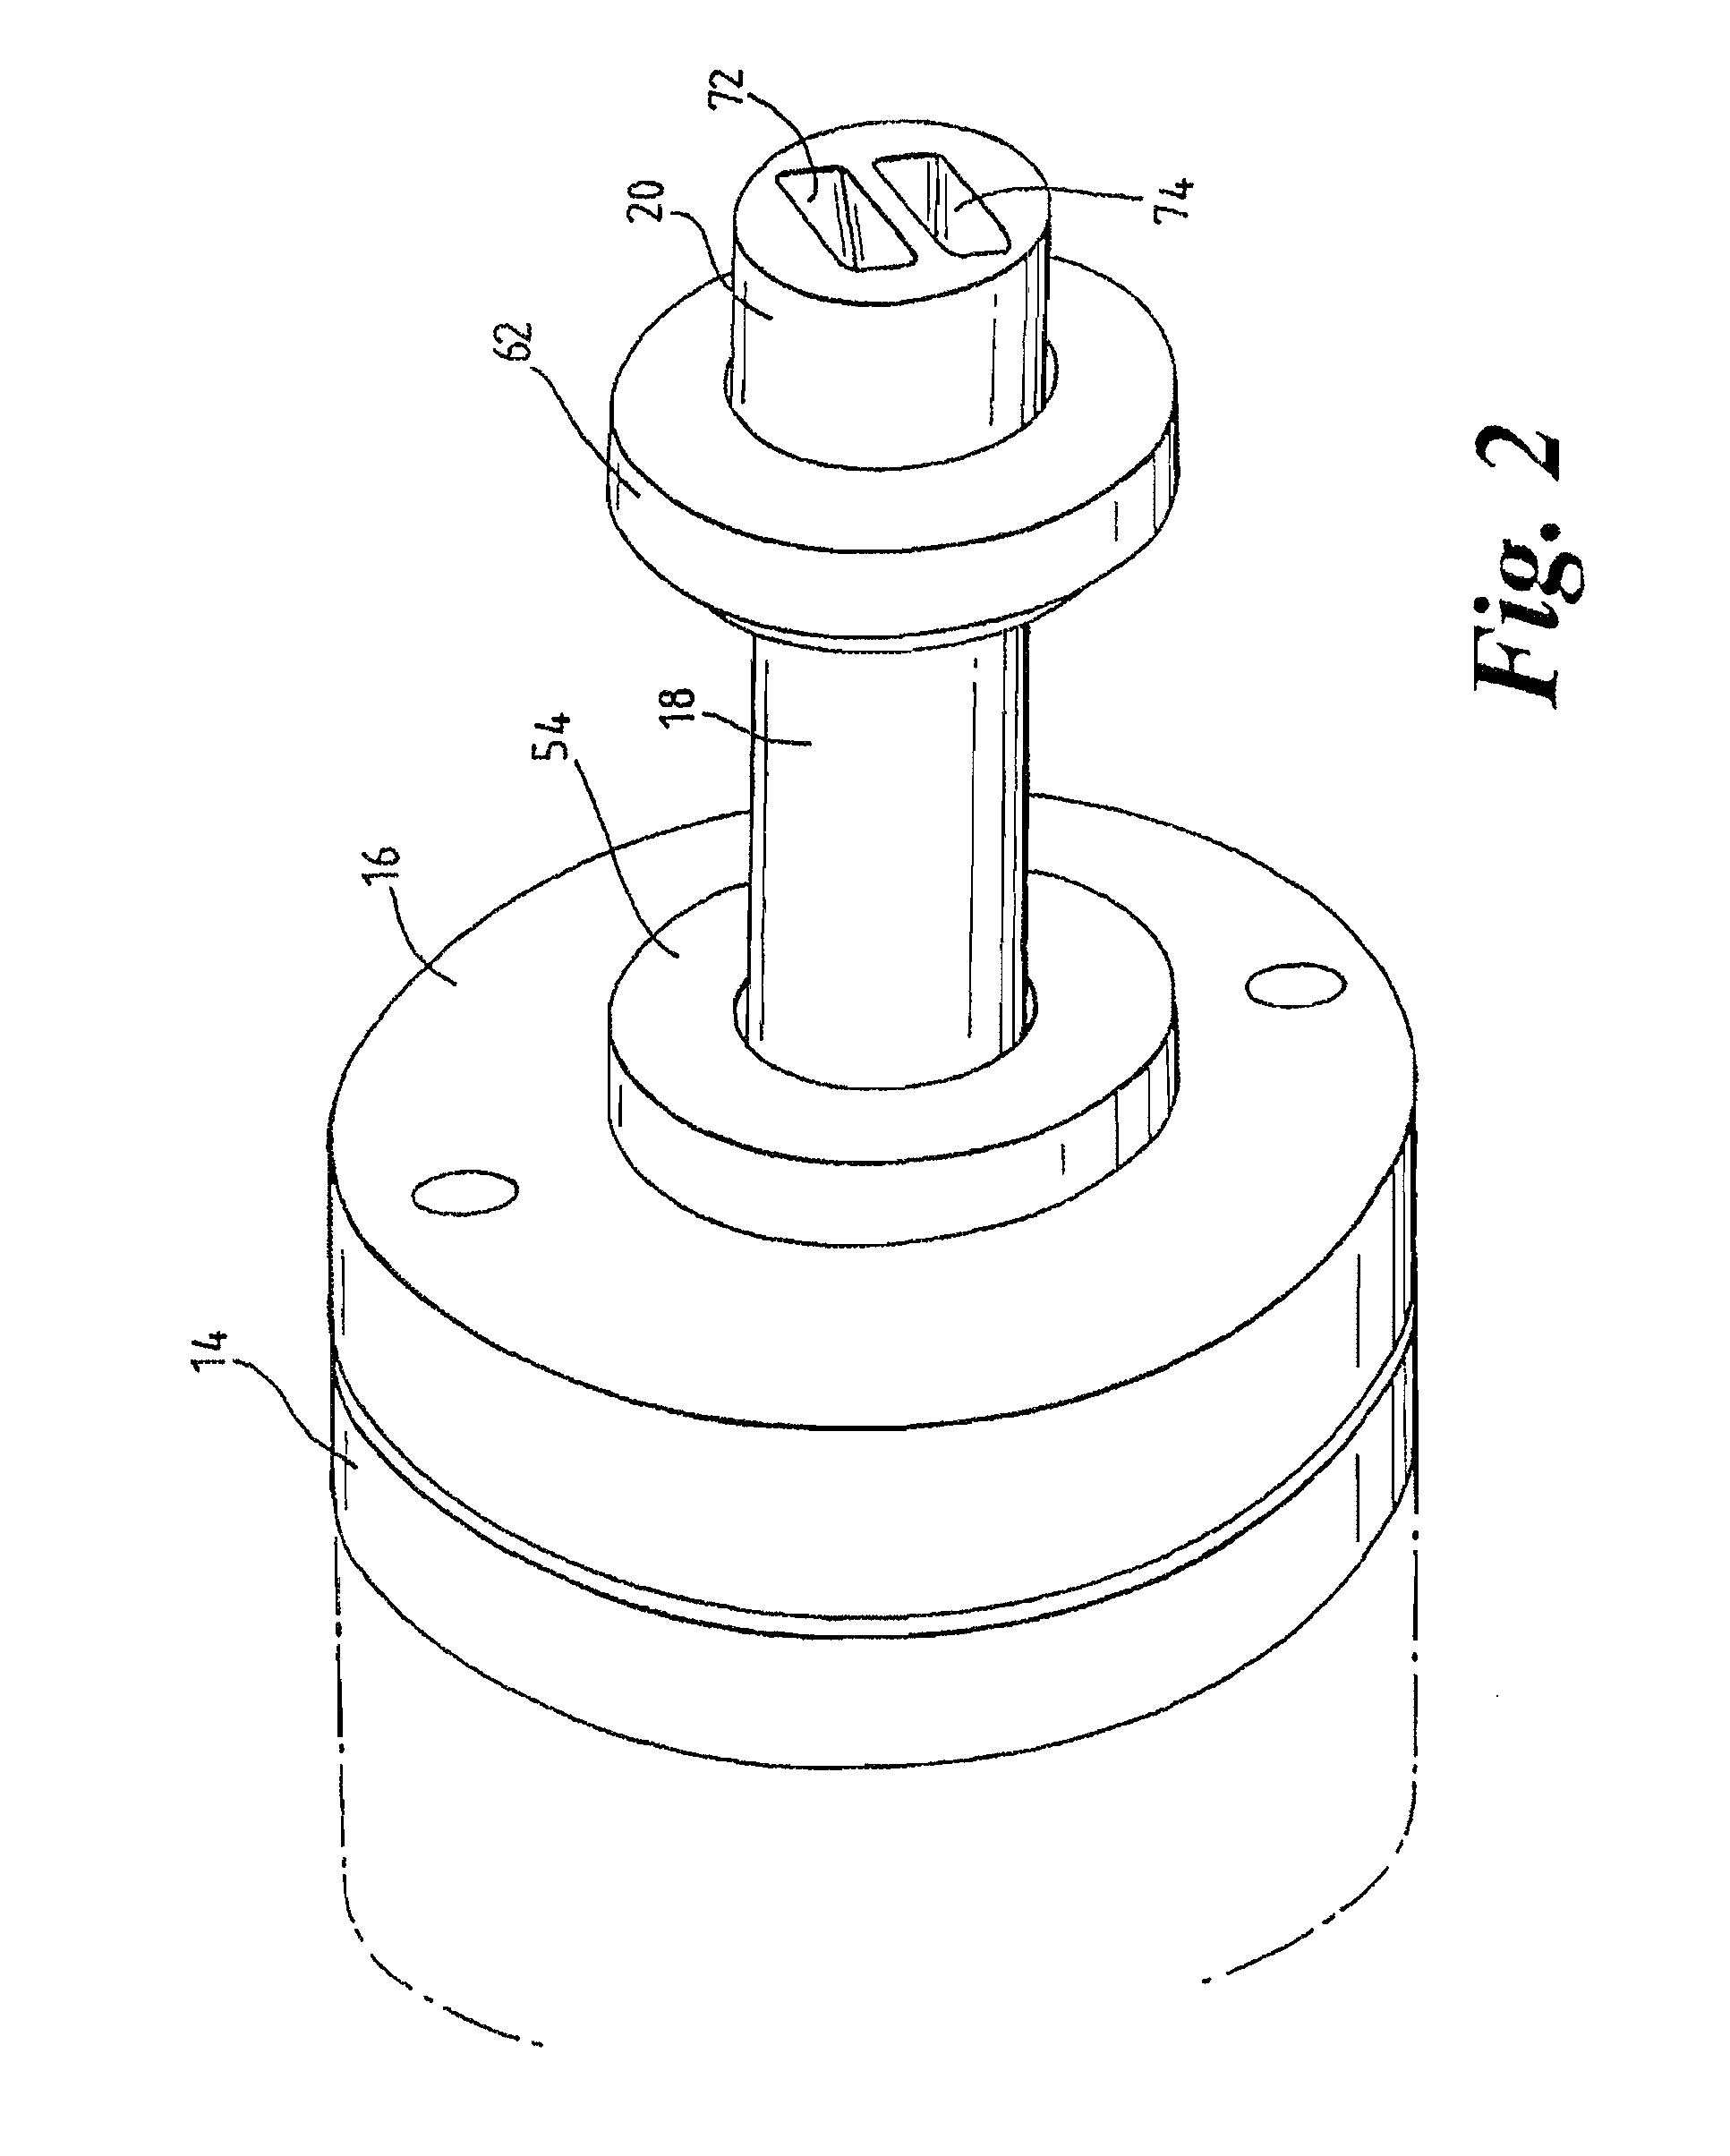 Apparatus and method for extruding a product